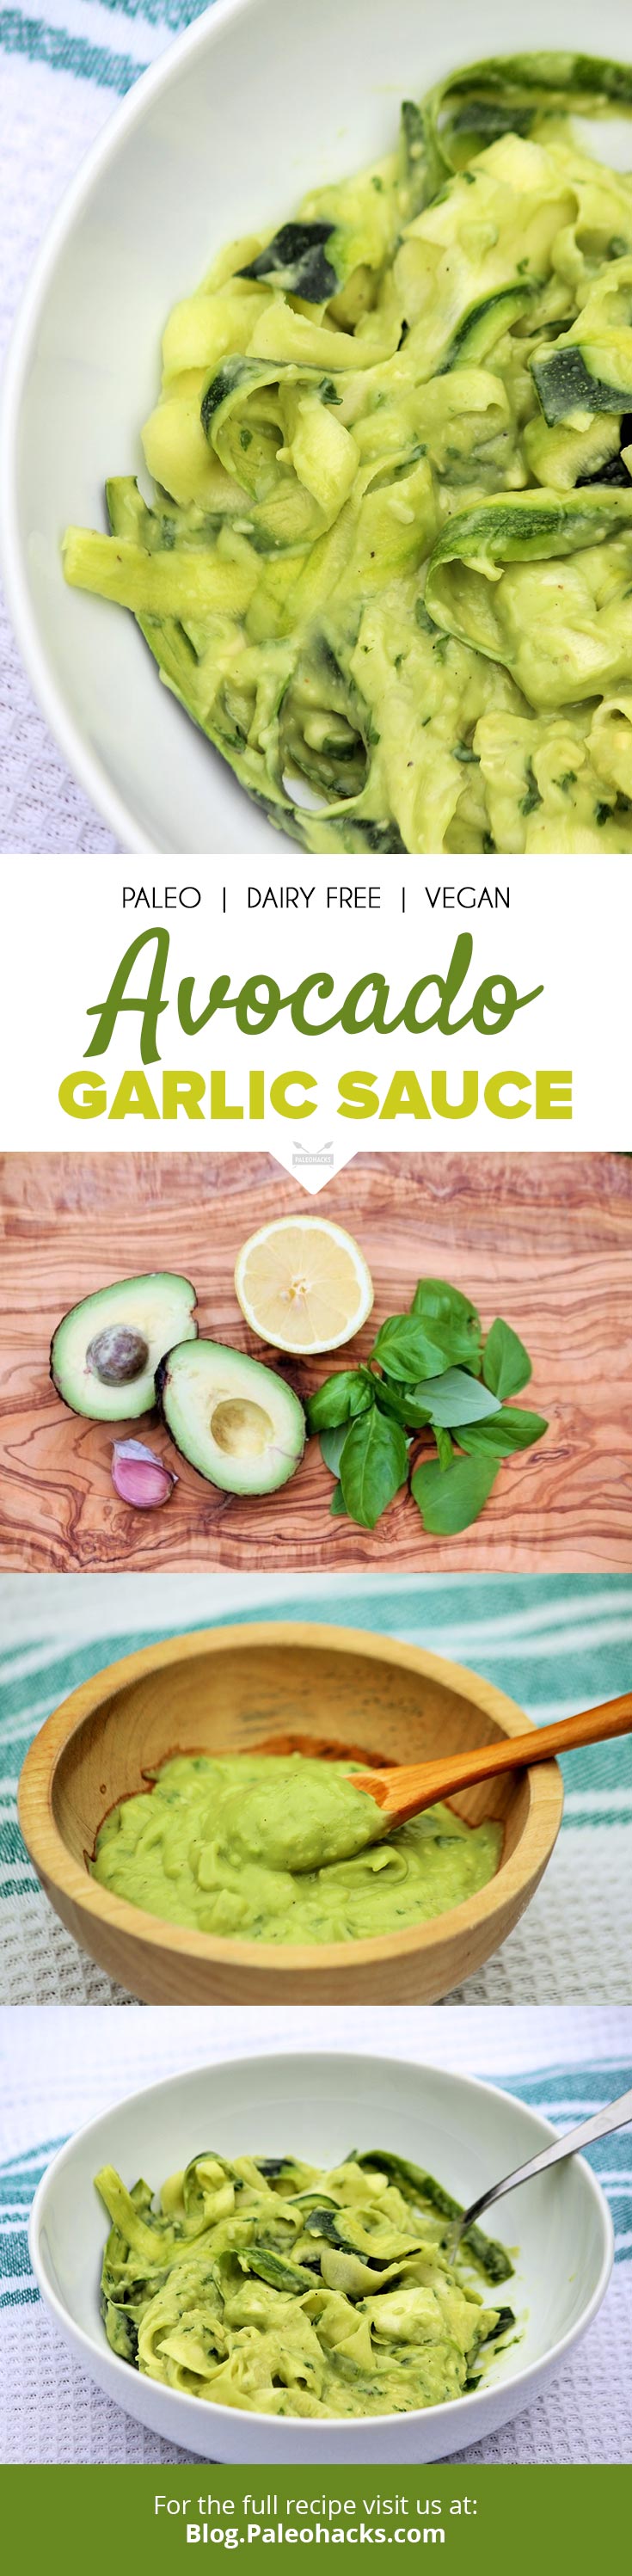 Try something different and blend up this avocado garlic sauce as a dip, or mix it with zucchini noodles for a crunchy, creamy dish.